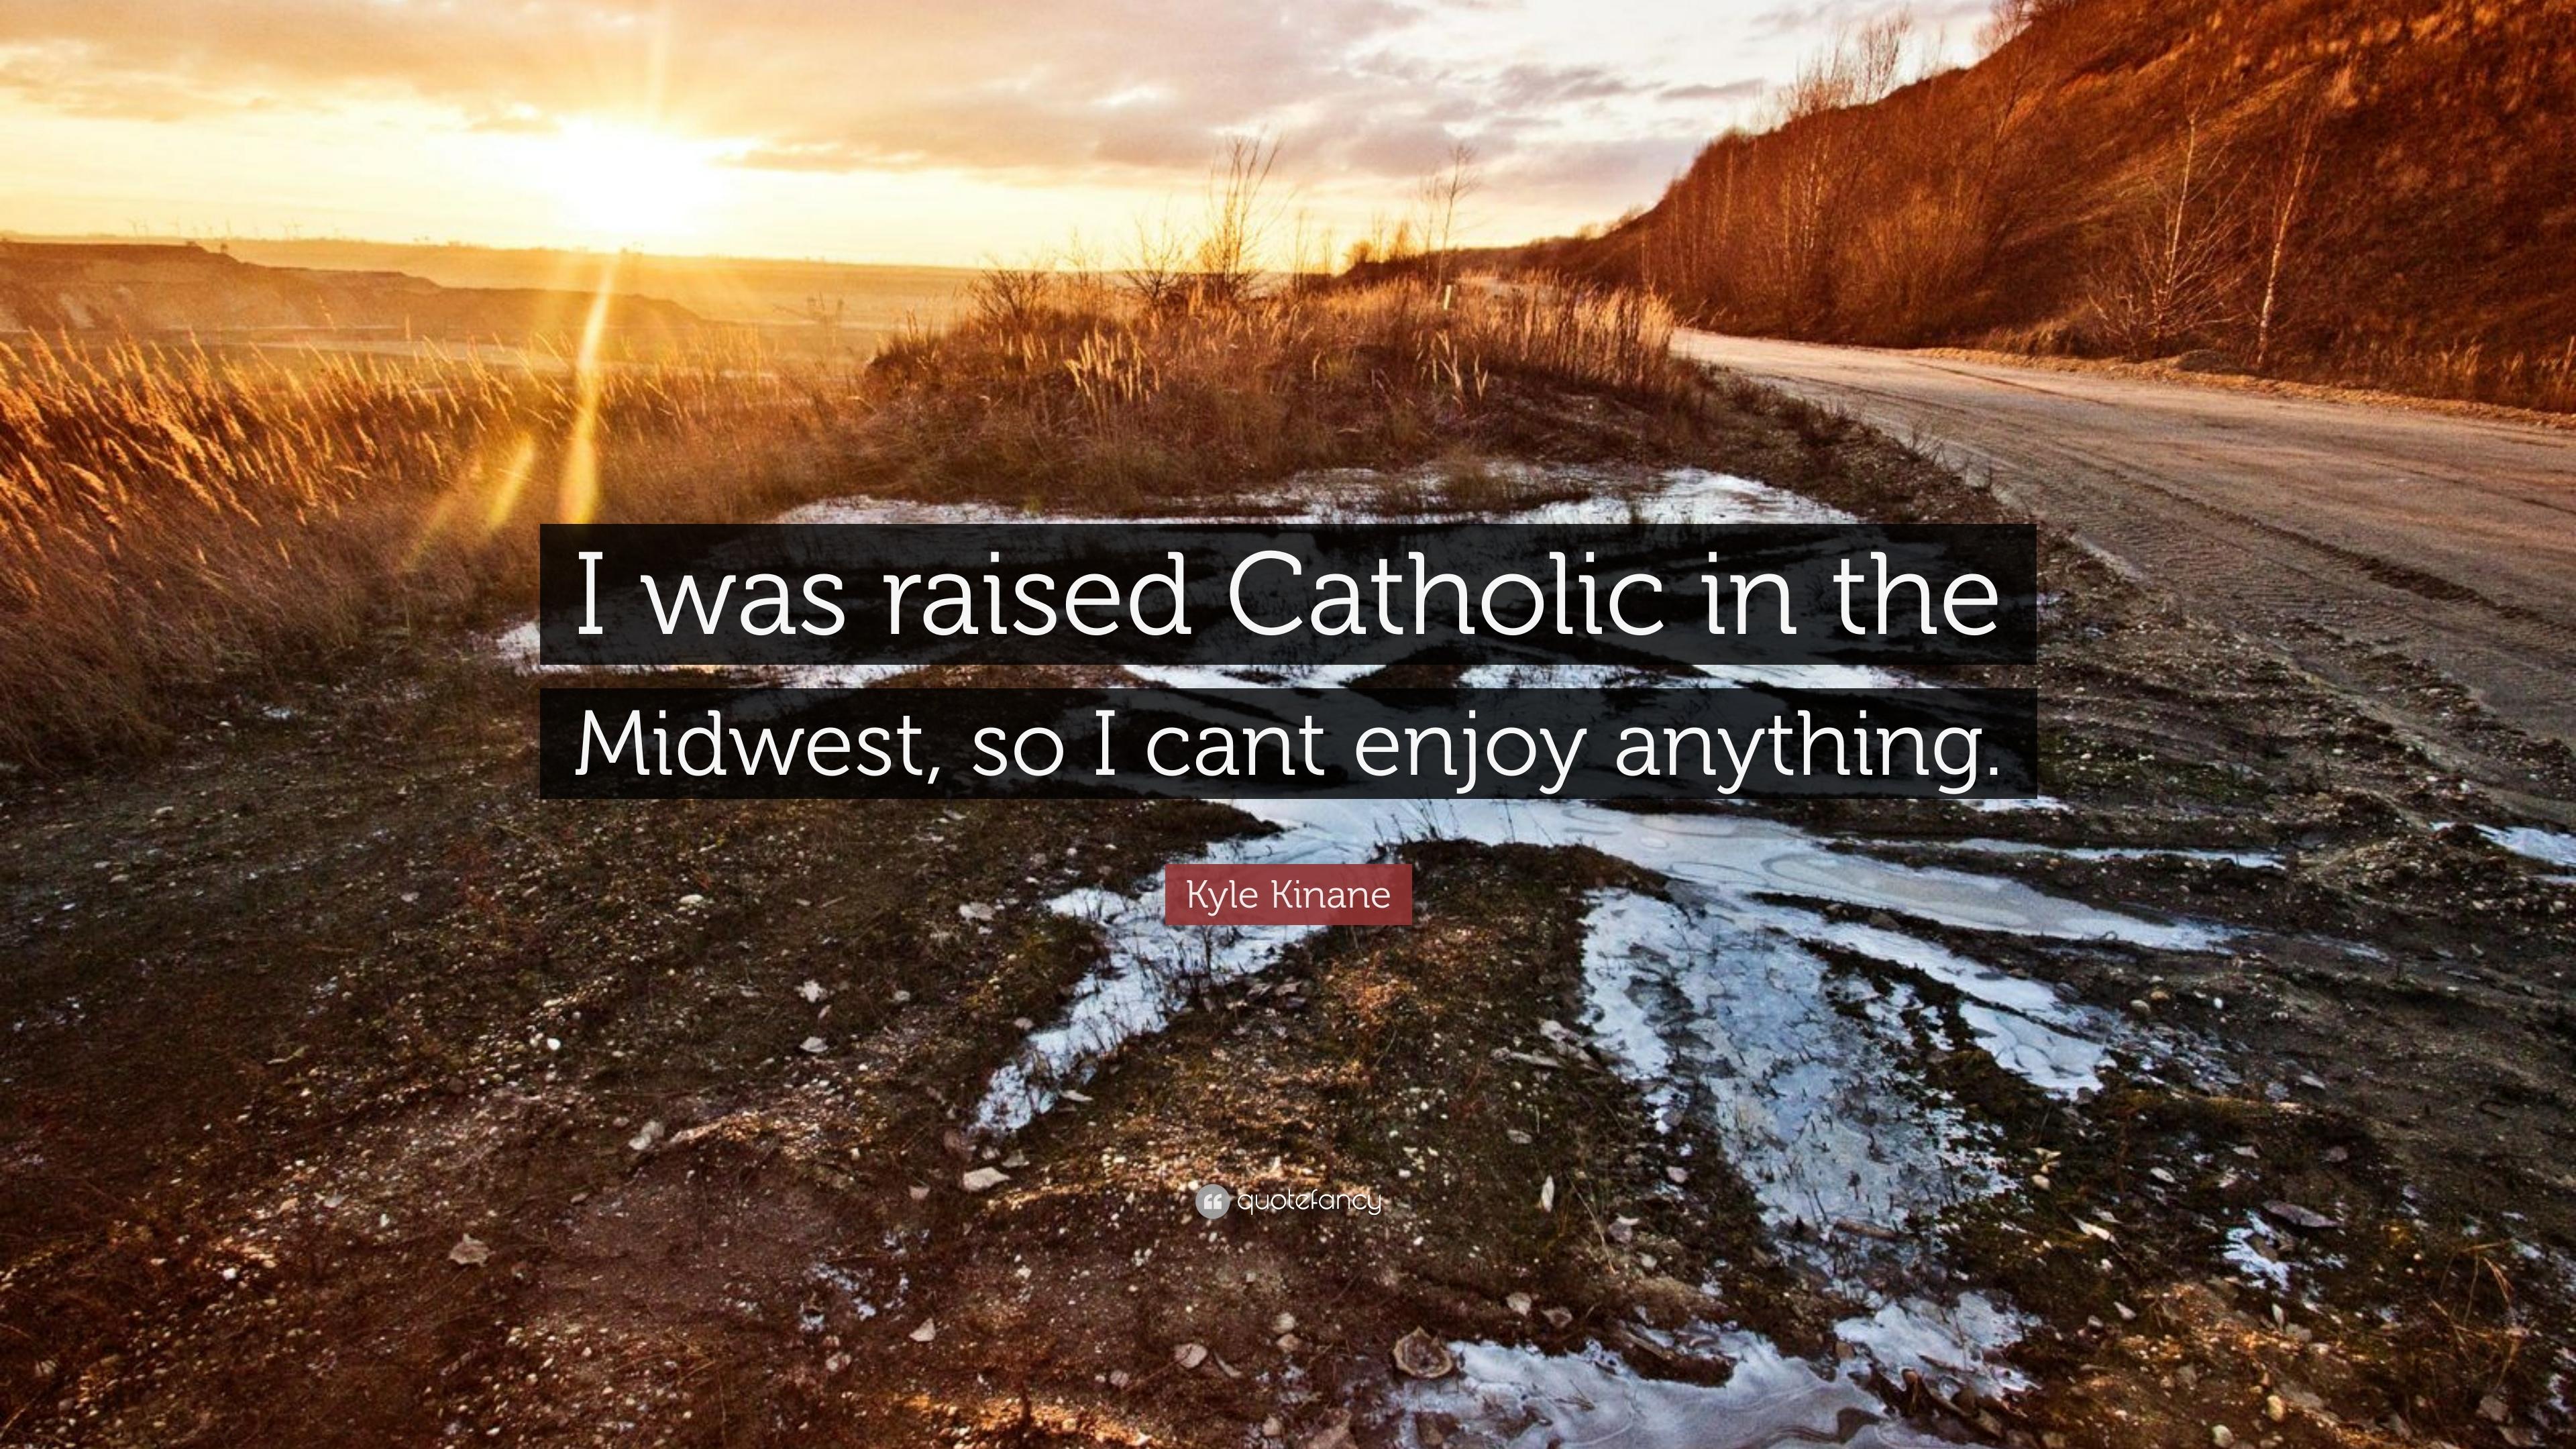 Kyle Kinane Quote: “I was raised Catholic in the Midwest, so I cant